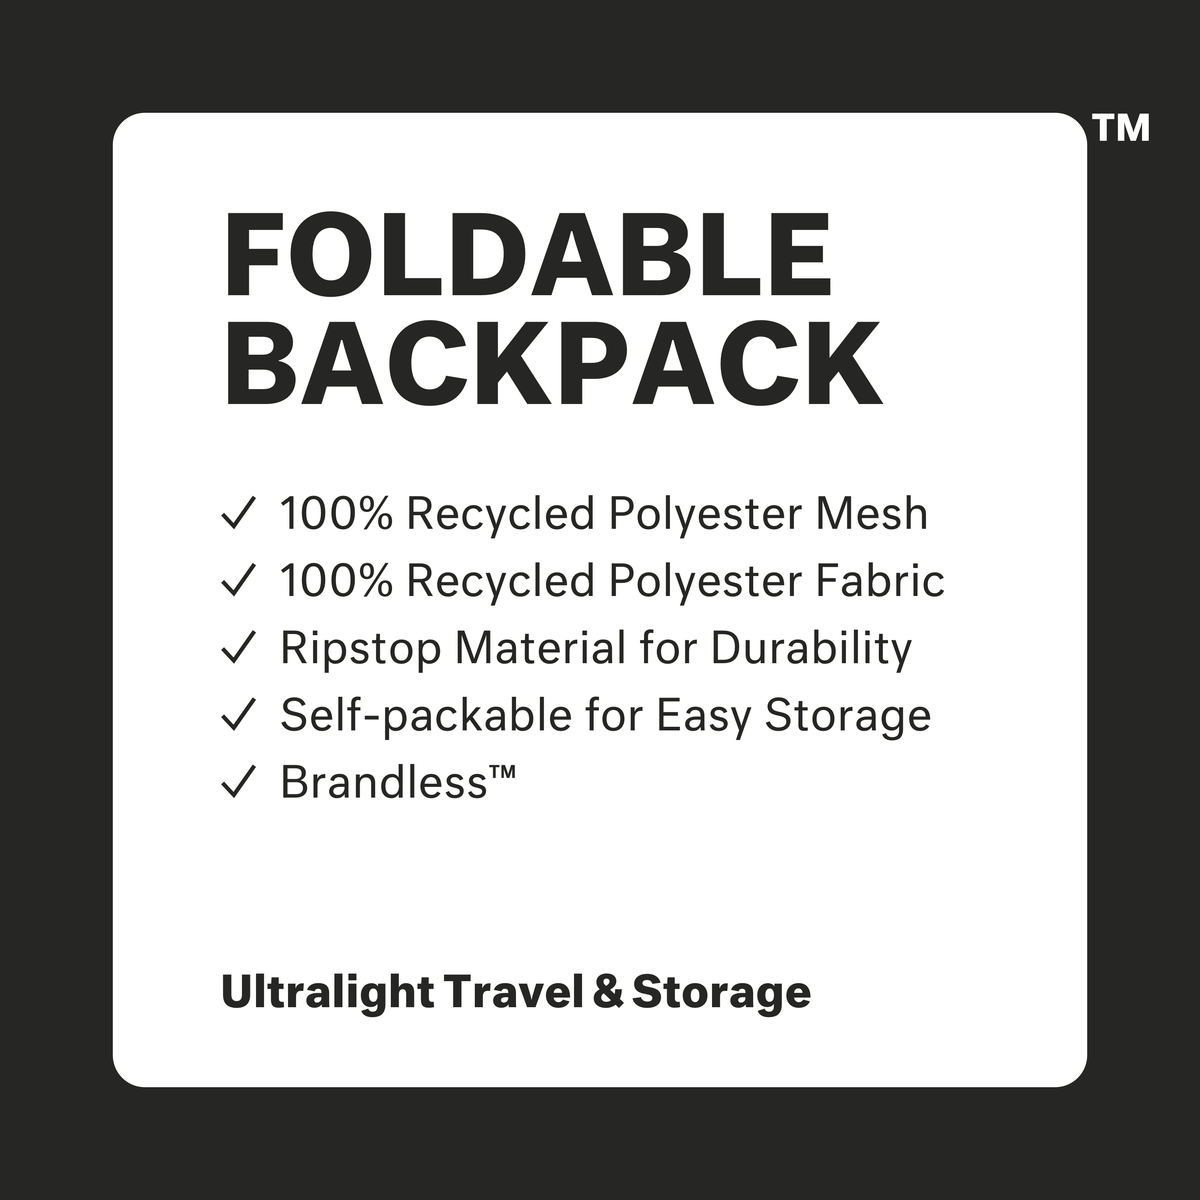 Foldable backpack: 100% recycled polyester mesh, 100% recycled polyester fabric, ripstop material for durability, self-packacble for easy storage. Brandless. Ultralight travel and storage.